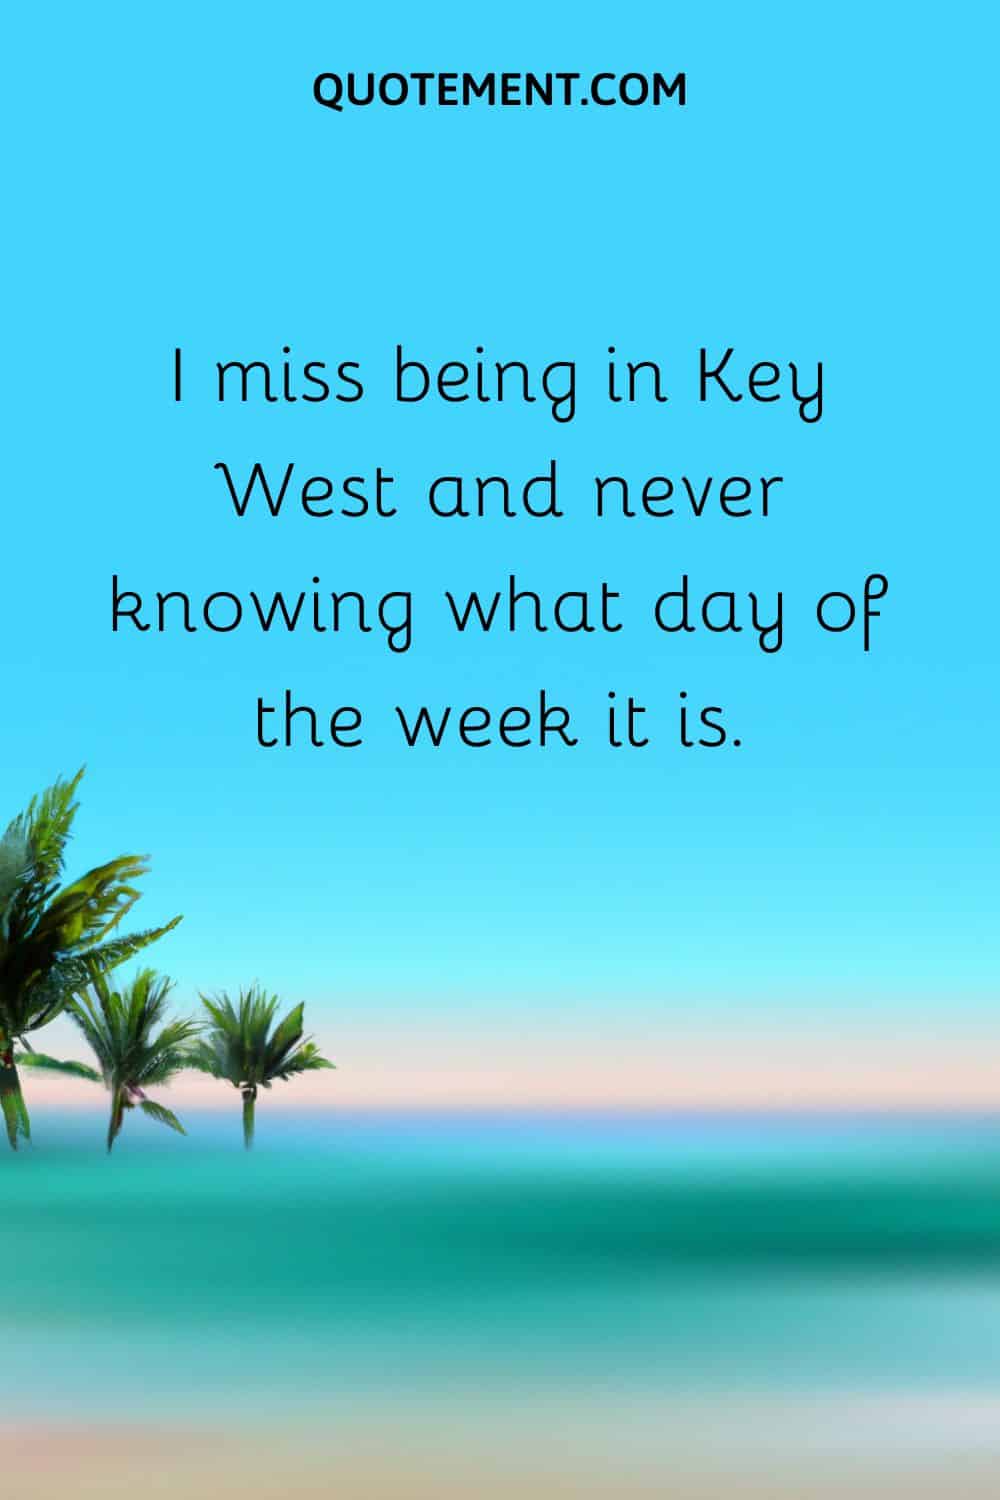 I miss being in Key West and never knowing what day of the week it is